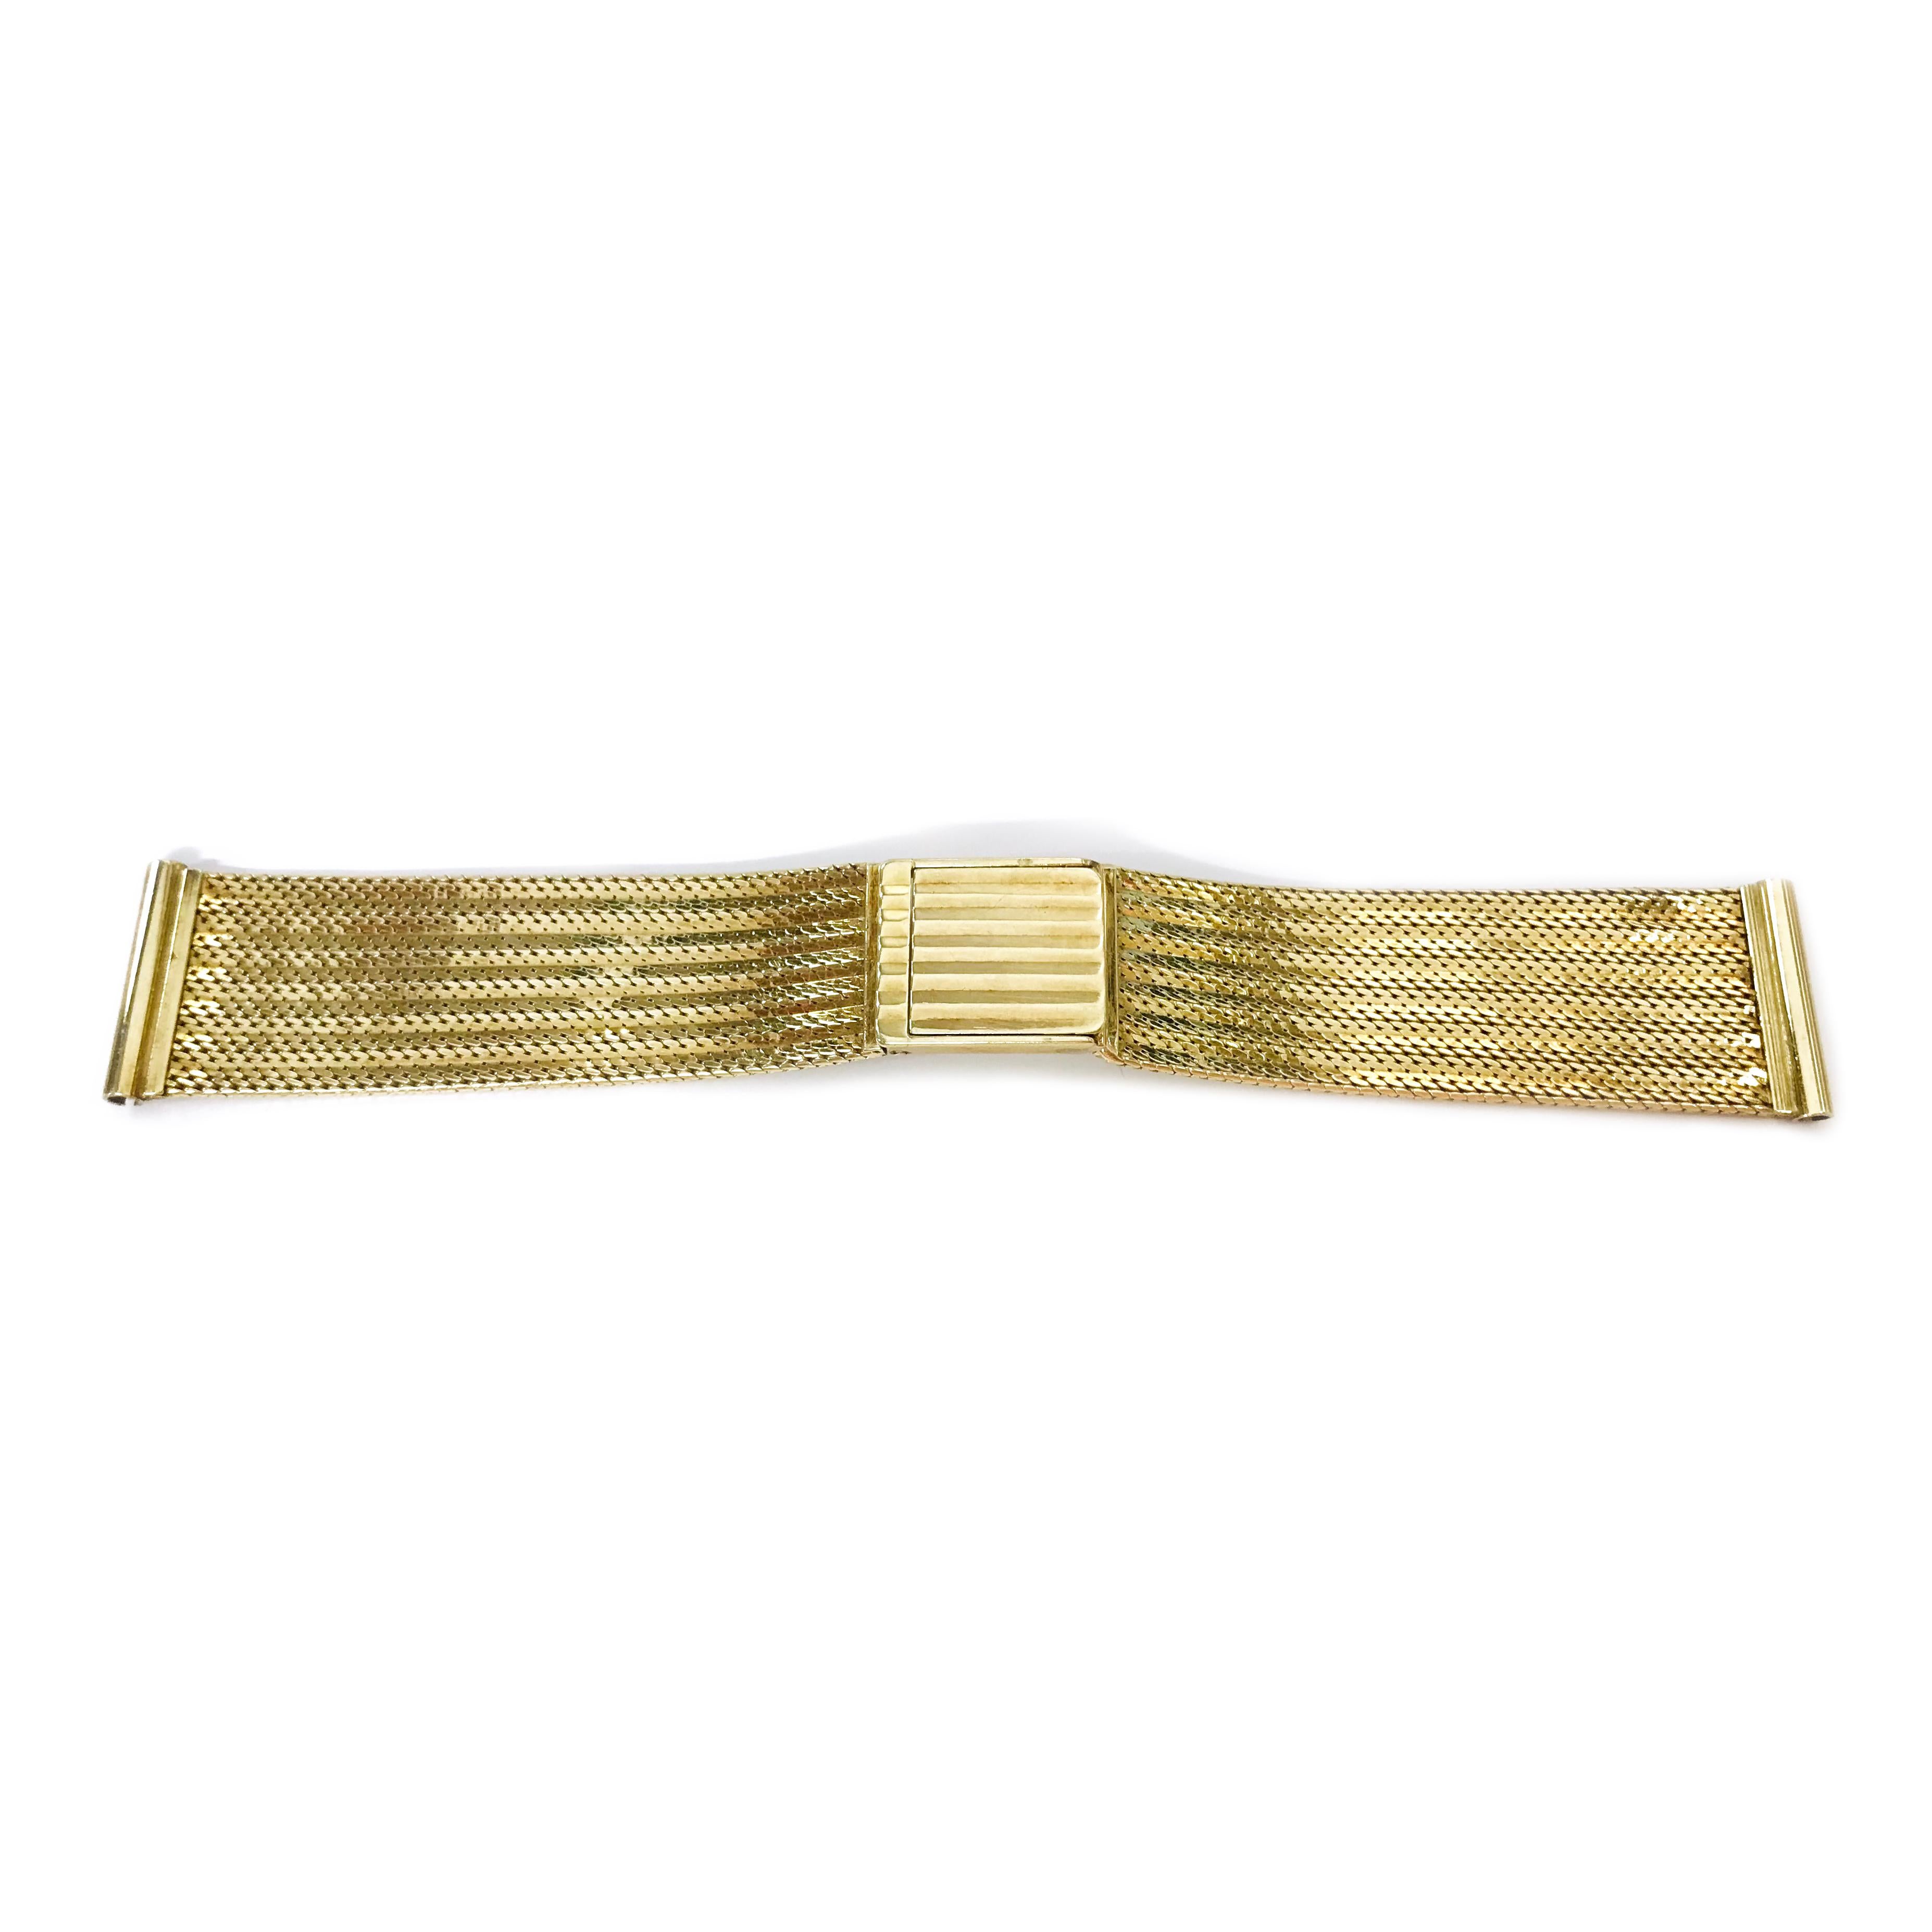 Vintage 14 Karat Gold Mesh Watch Band, Circa 1970s. Stamped on the inside clasp is 14K 50 AR meaning the band was manufactured in the Arezzo area of Italy. The gold band is 4.85